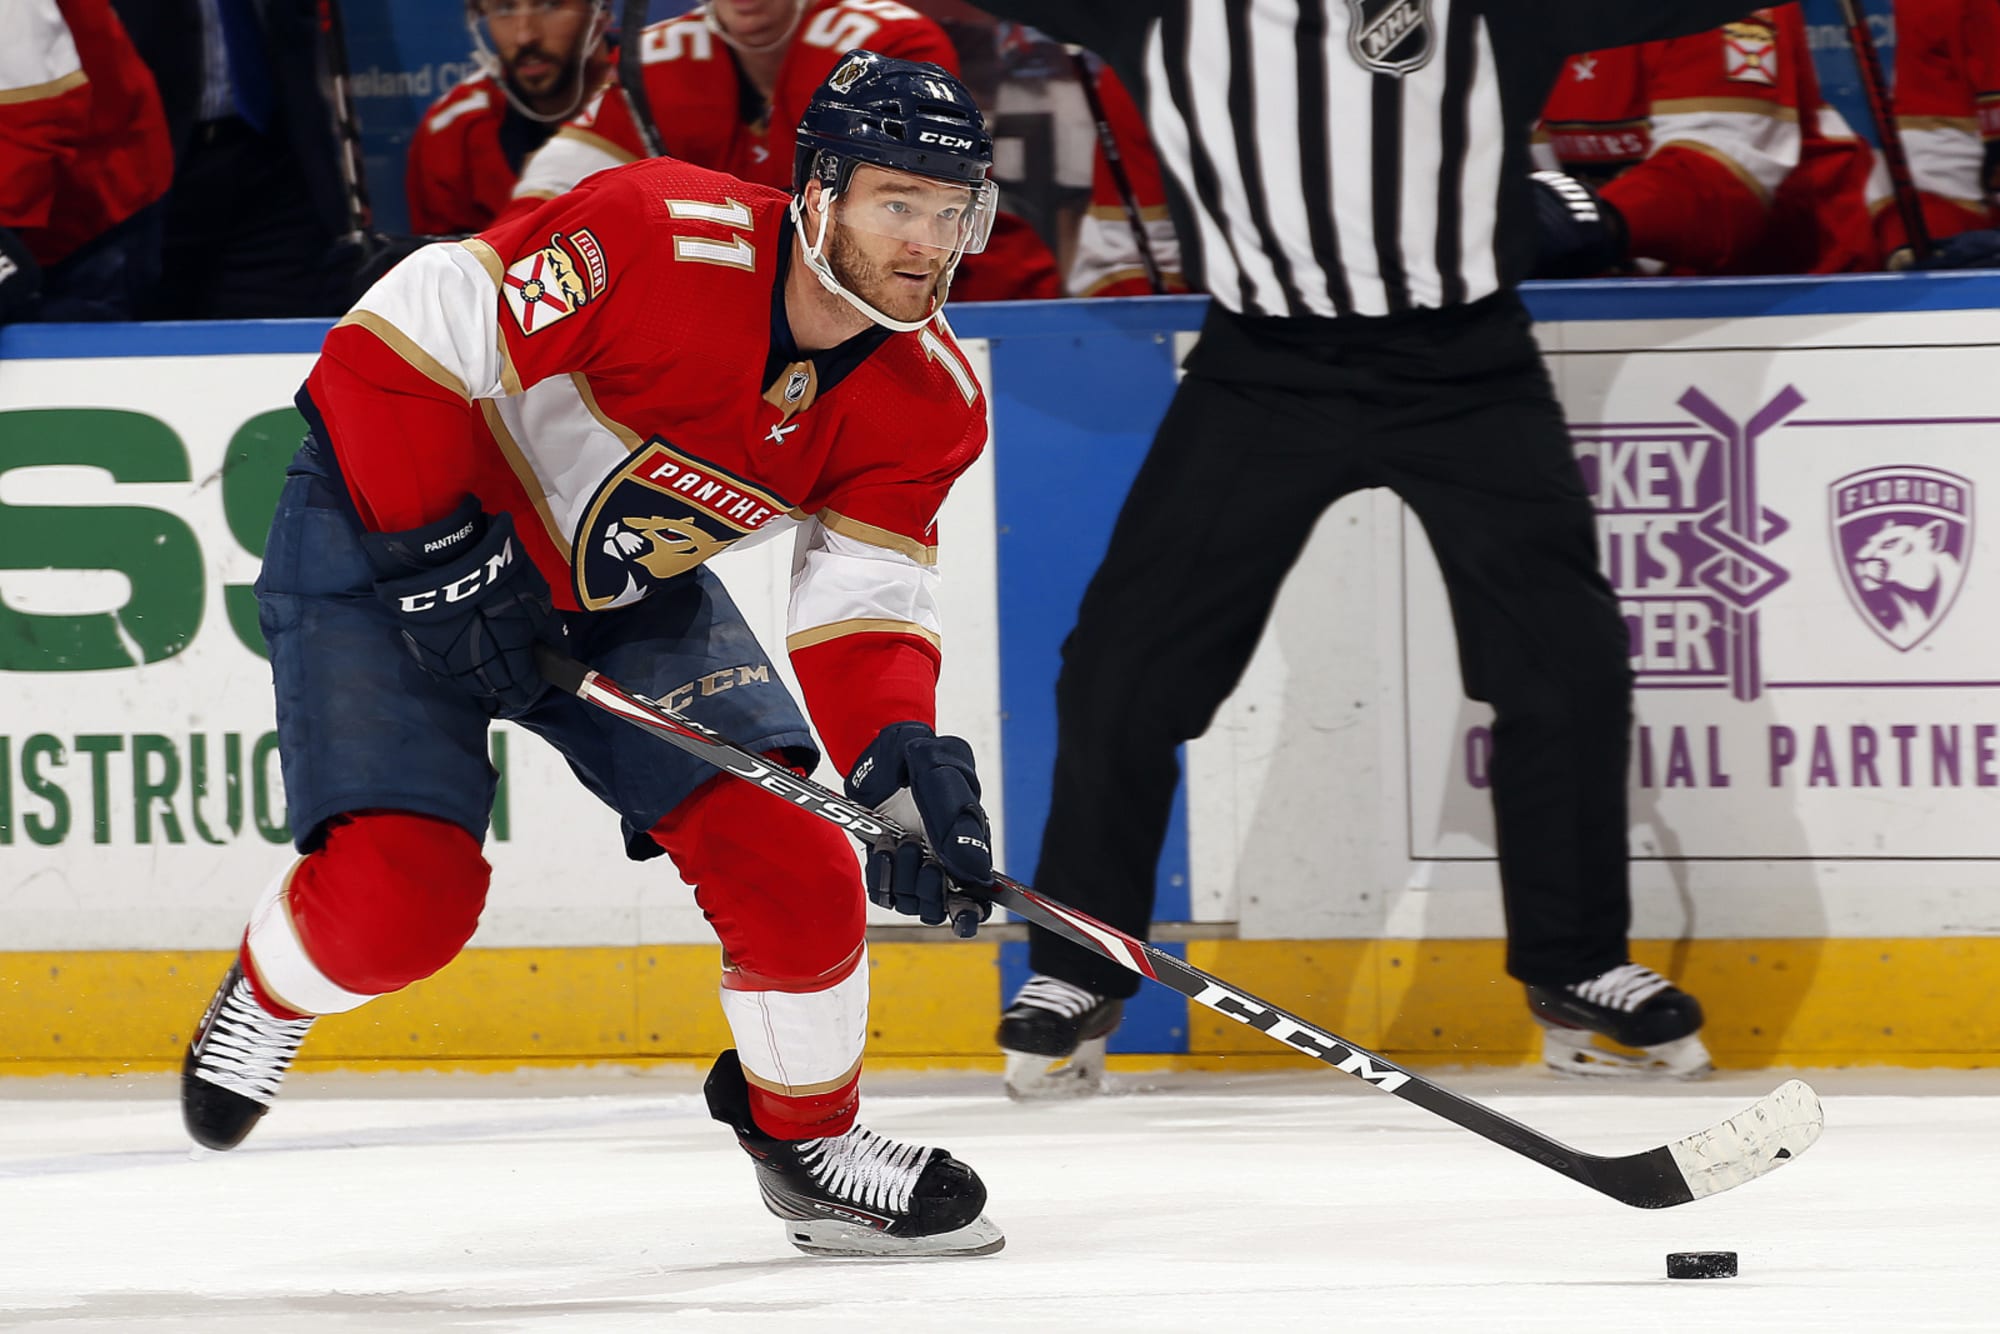 Some appreciation for Panthers' All-Star Huberdeau - NBC Sports